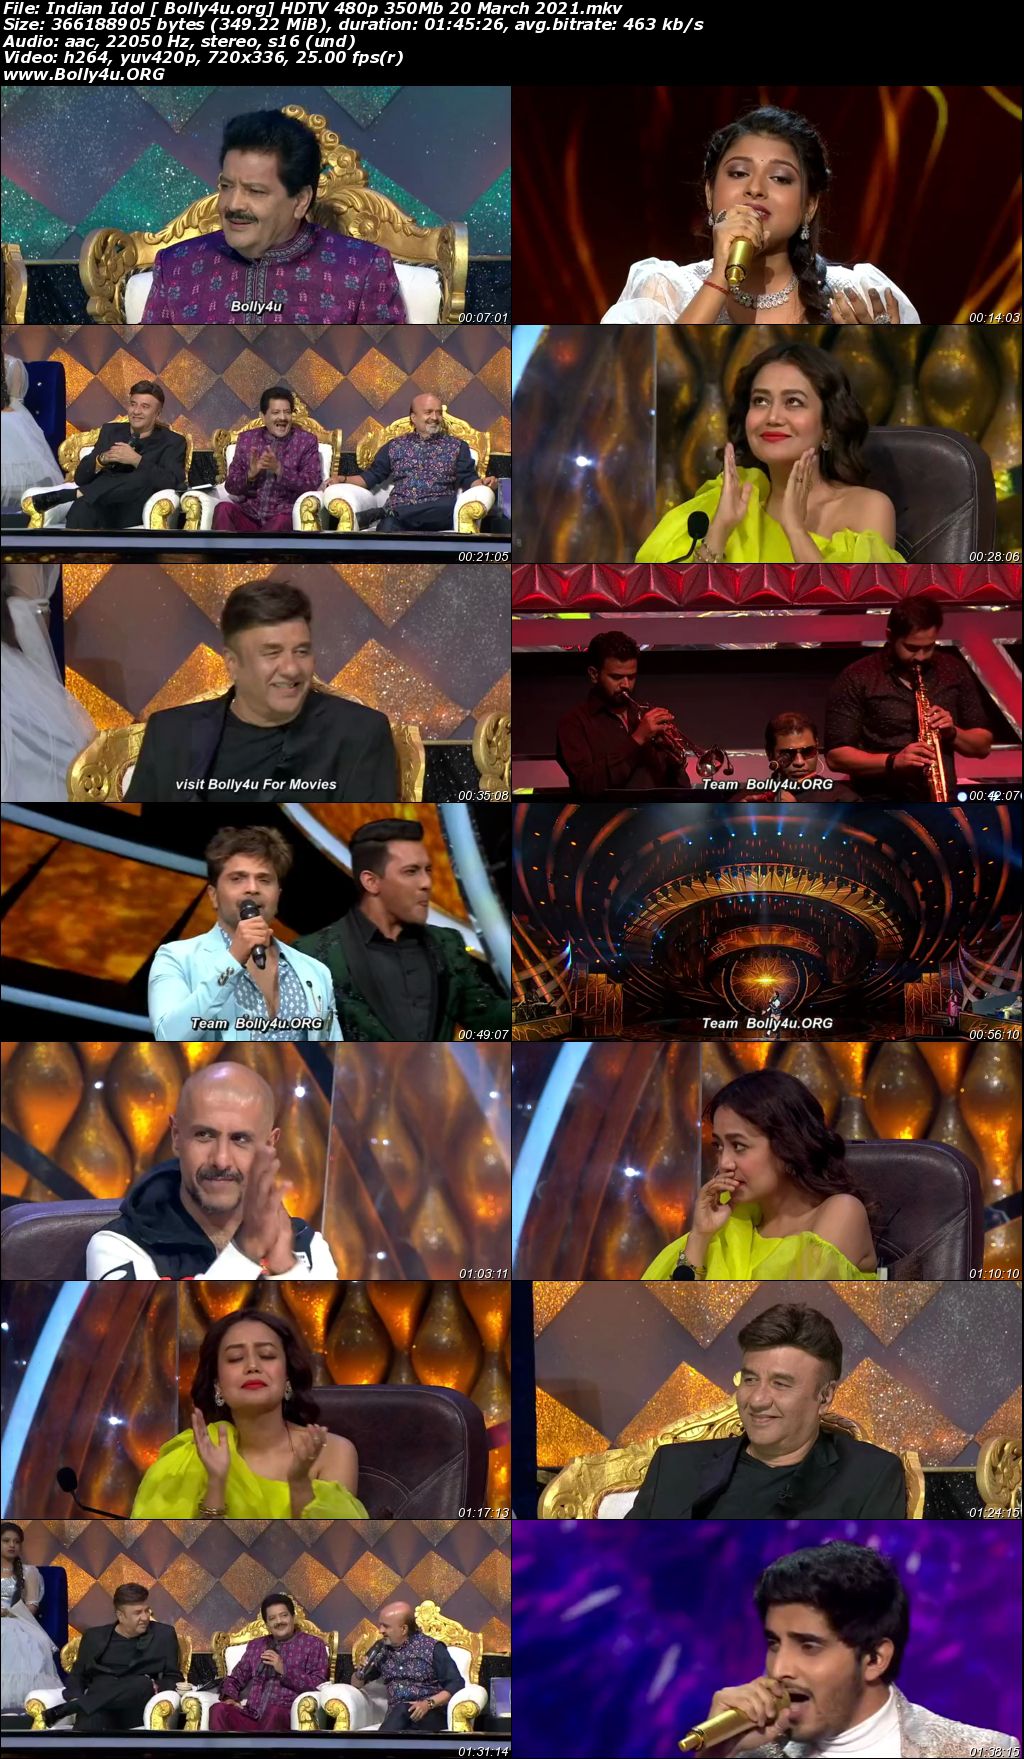 Indian Idol HDTV 480p 350Mb 20 March 2021 Download